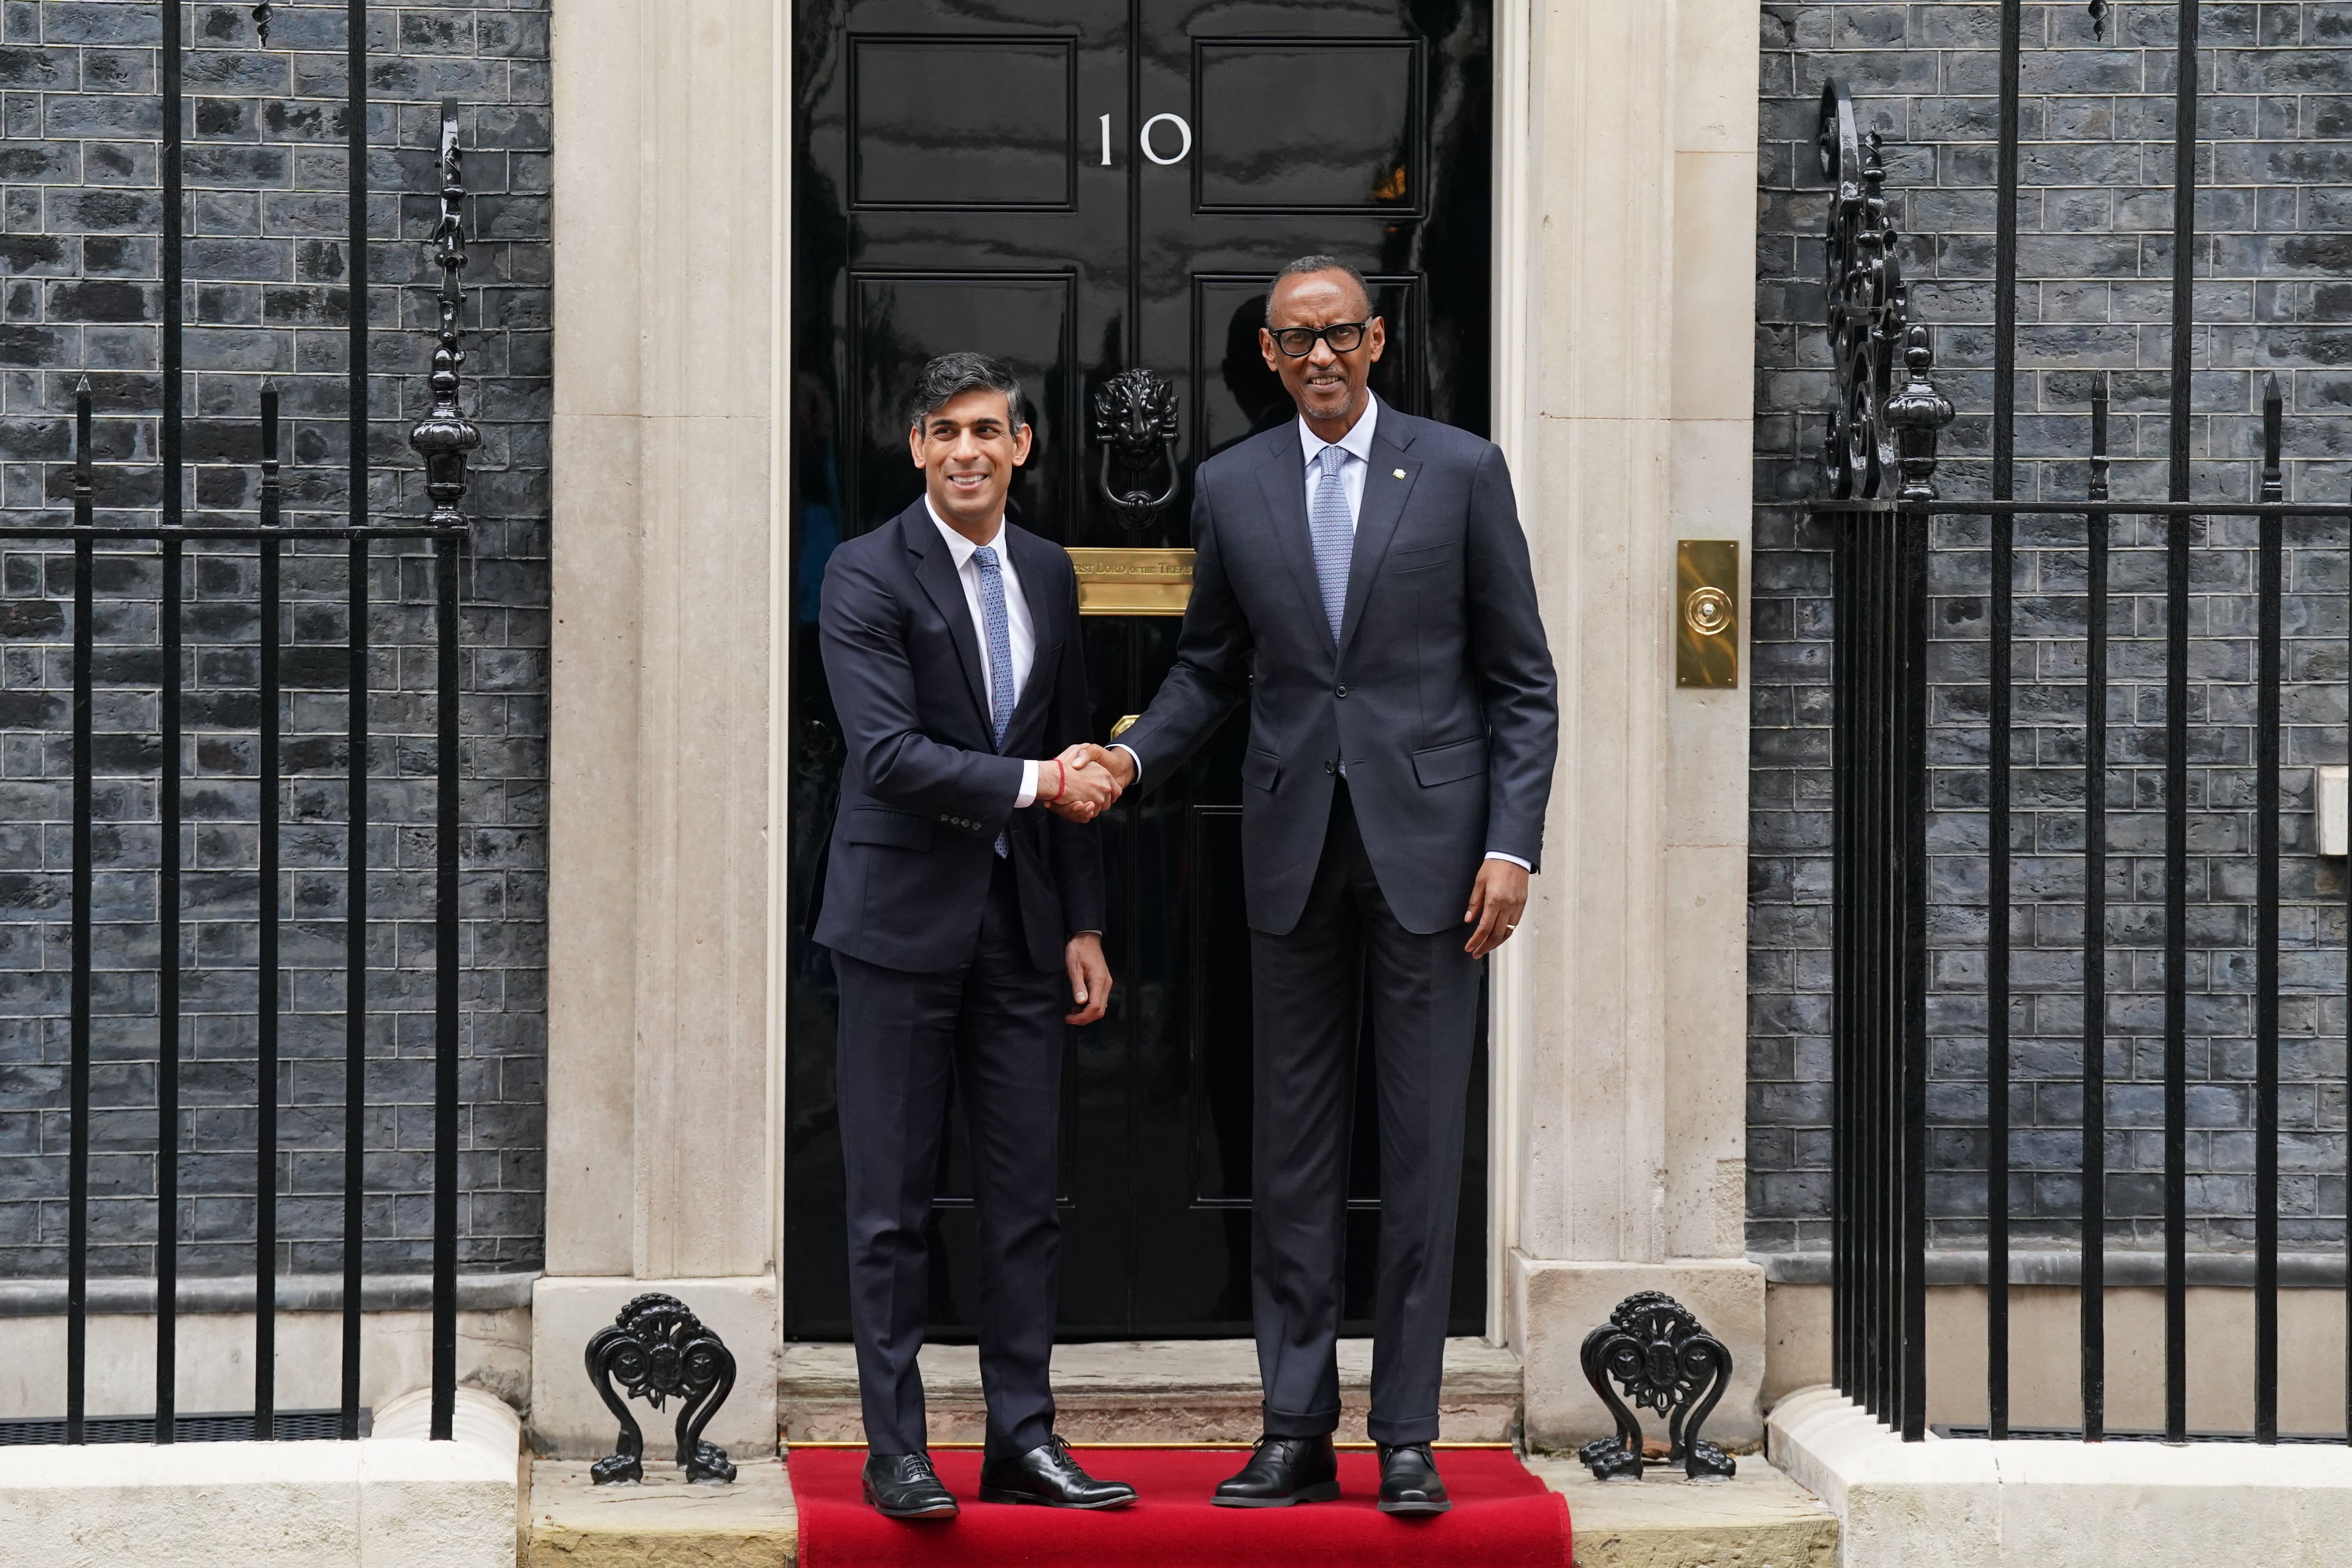 Prime Minister Rishi Sunak has hosted Rwandan President Paul Kagame in Downing Street amid reports that properties in Kigali earmarked for the UK’s stalled deportation scheme have instead been sold to local buyers (Stefan Rousseau/PA)